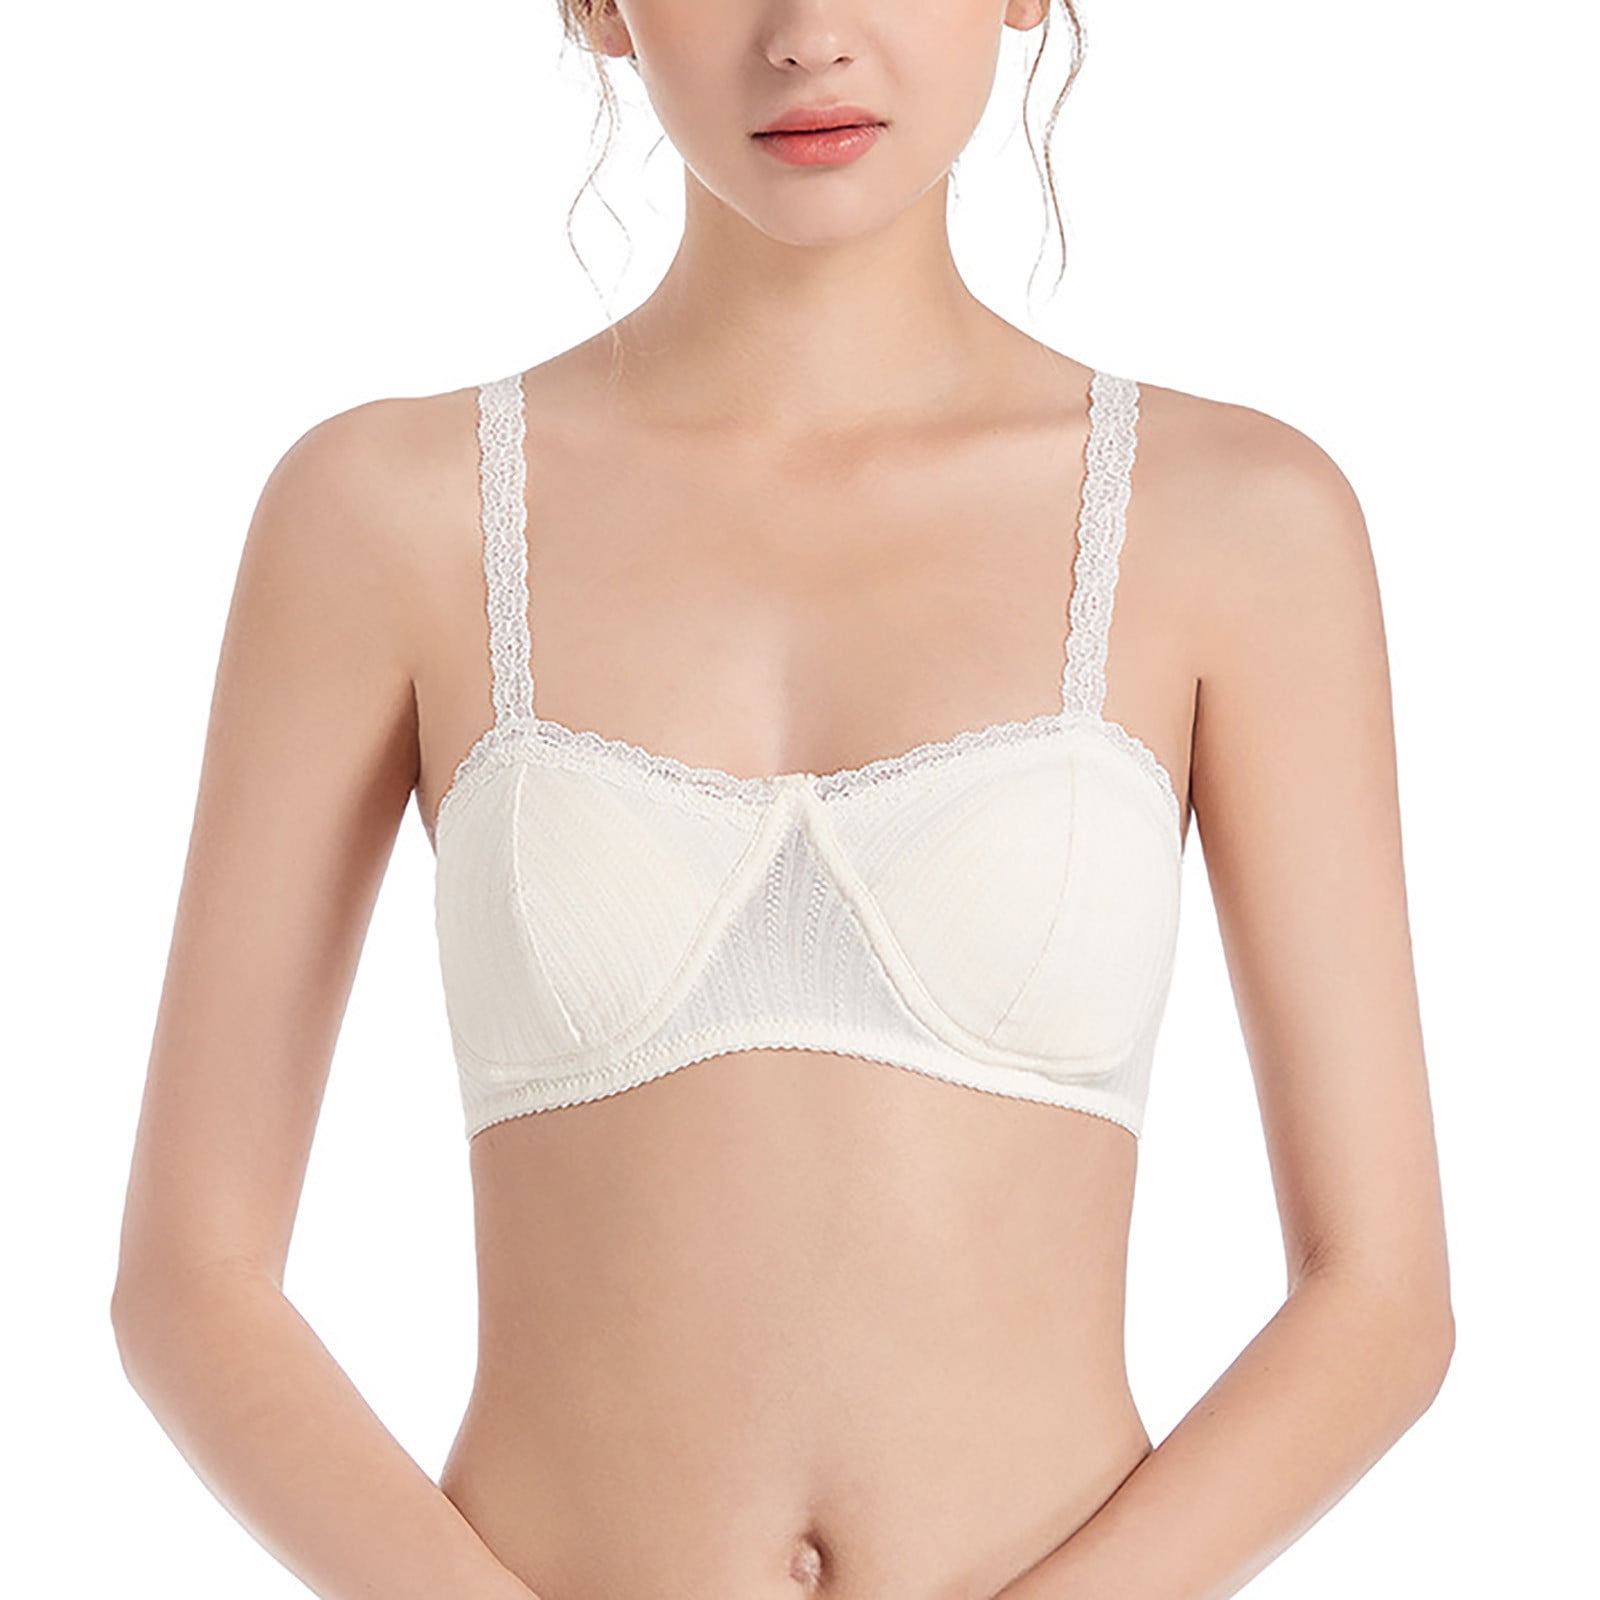 Lopecy-Sta Women's Sexy Ultra-thin High Beauty Lace Underwear Two-piece Set  Womens Bras Sales Clearance Bralettes for Women White